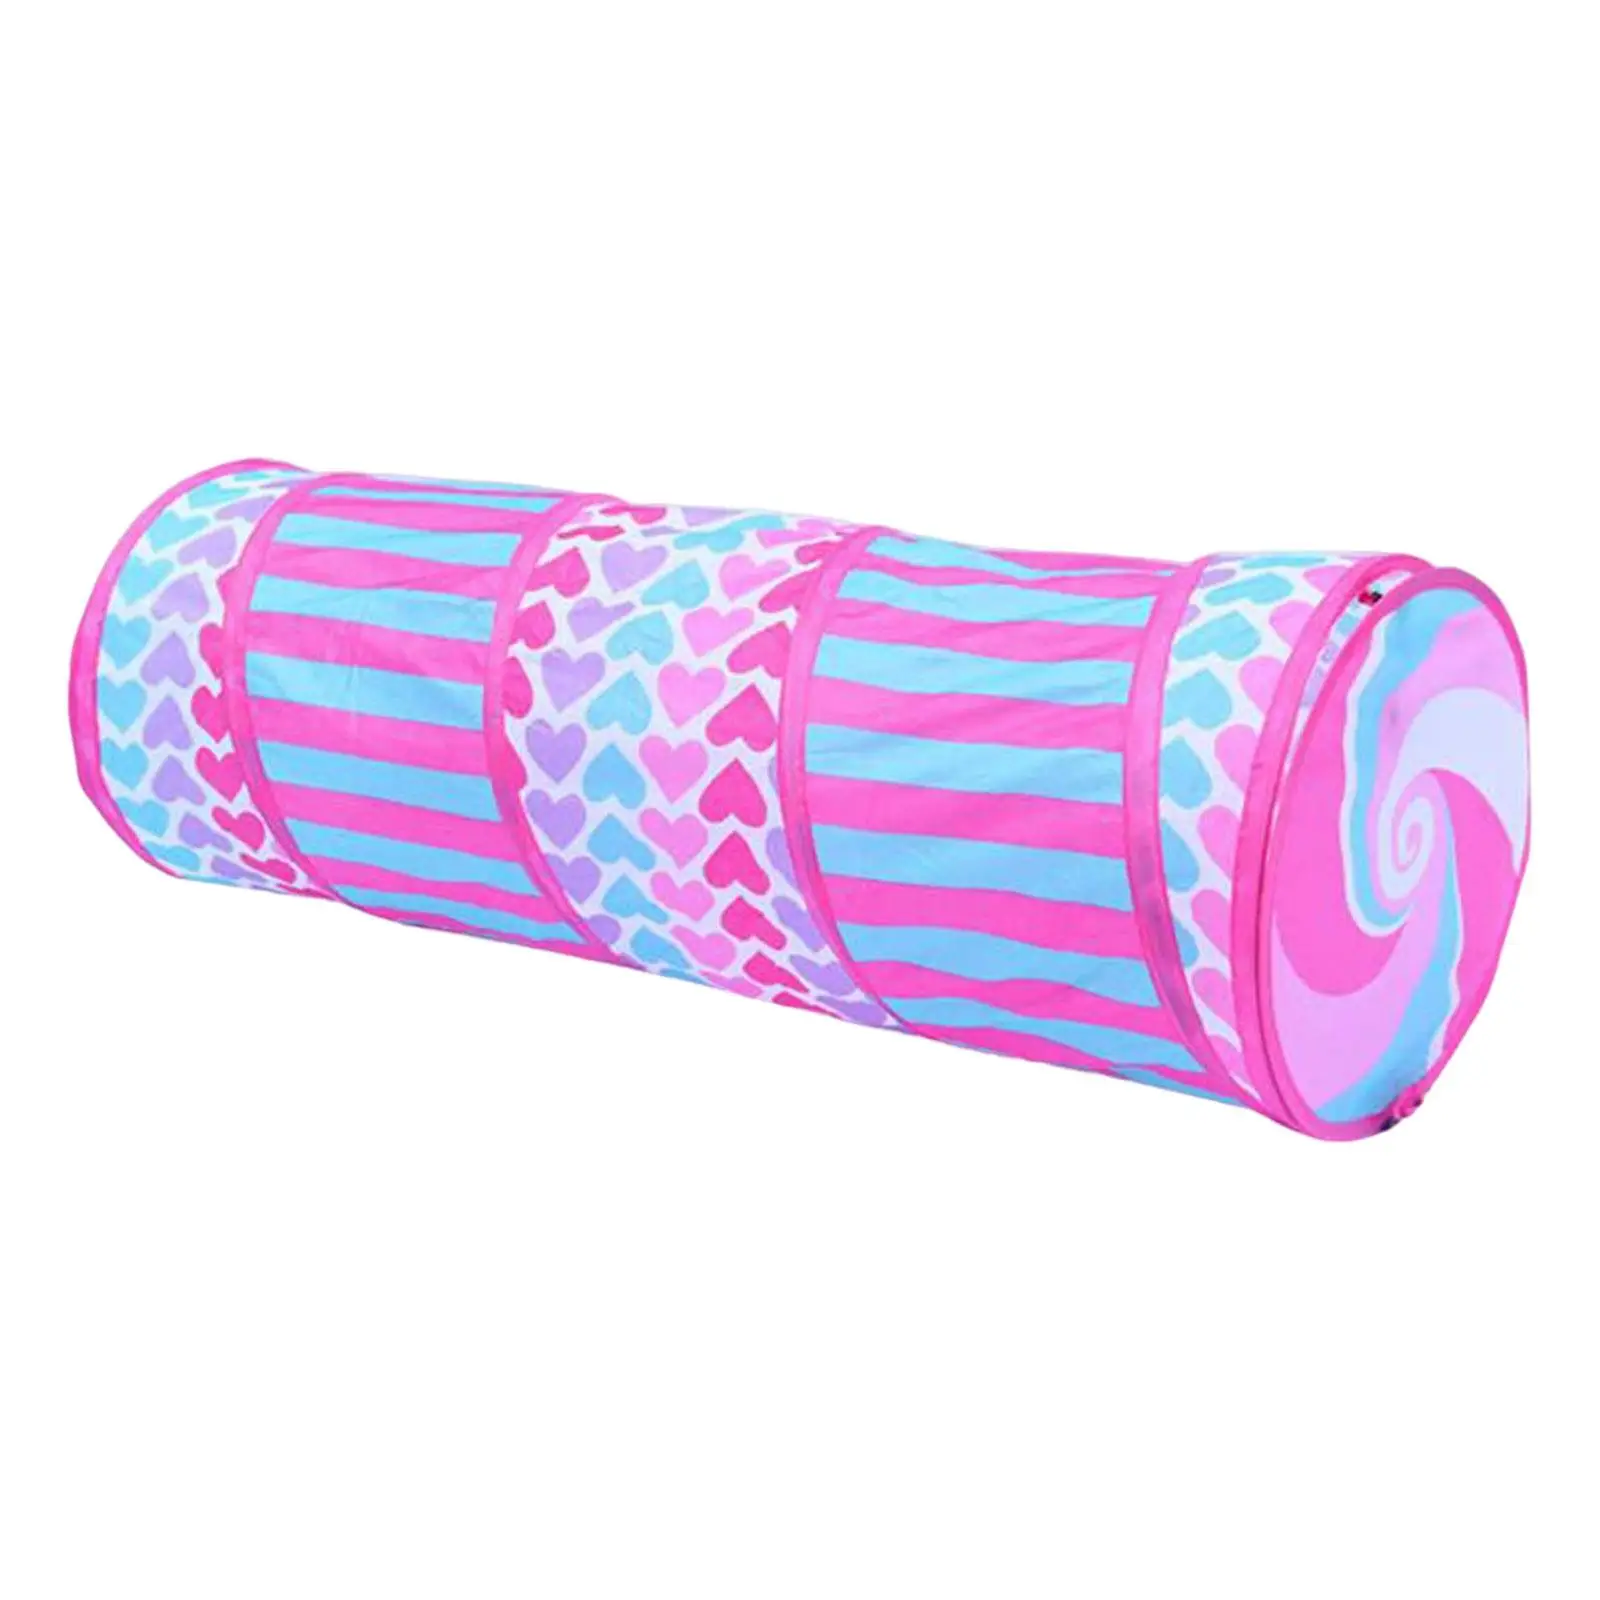 Kids Play Tunnel Indoor Outdoor Developmental Activity Toy Indoor Crawl Tube Pop up Crawl Baby Tunnel Toy for Pets Great Gift